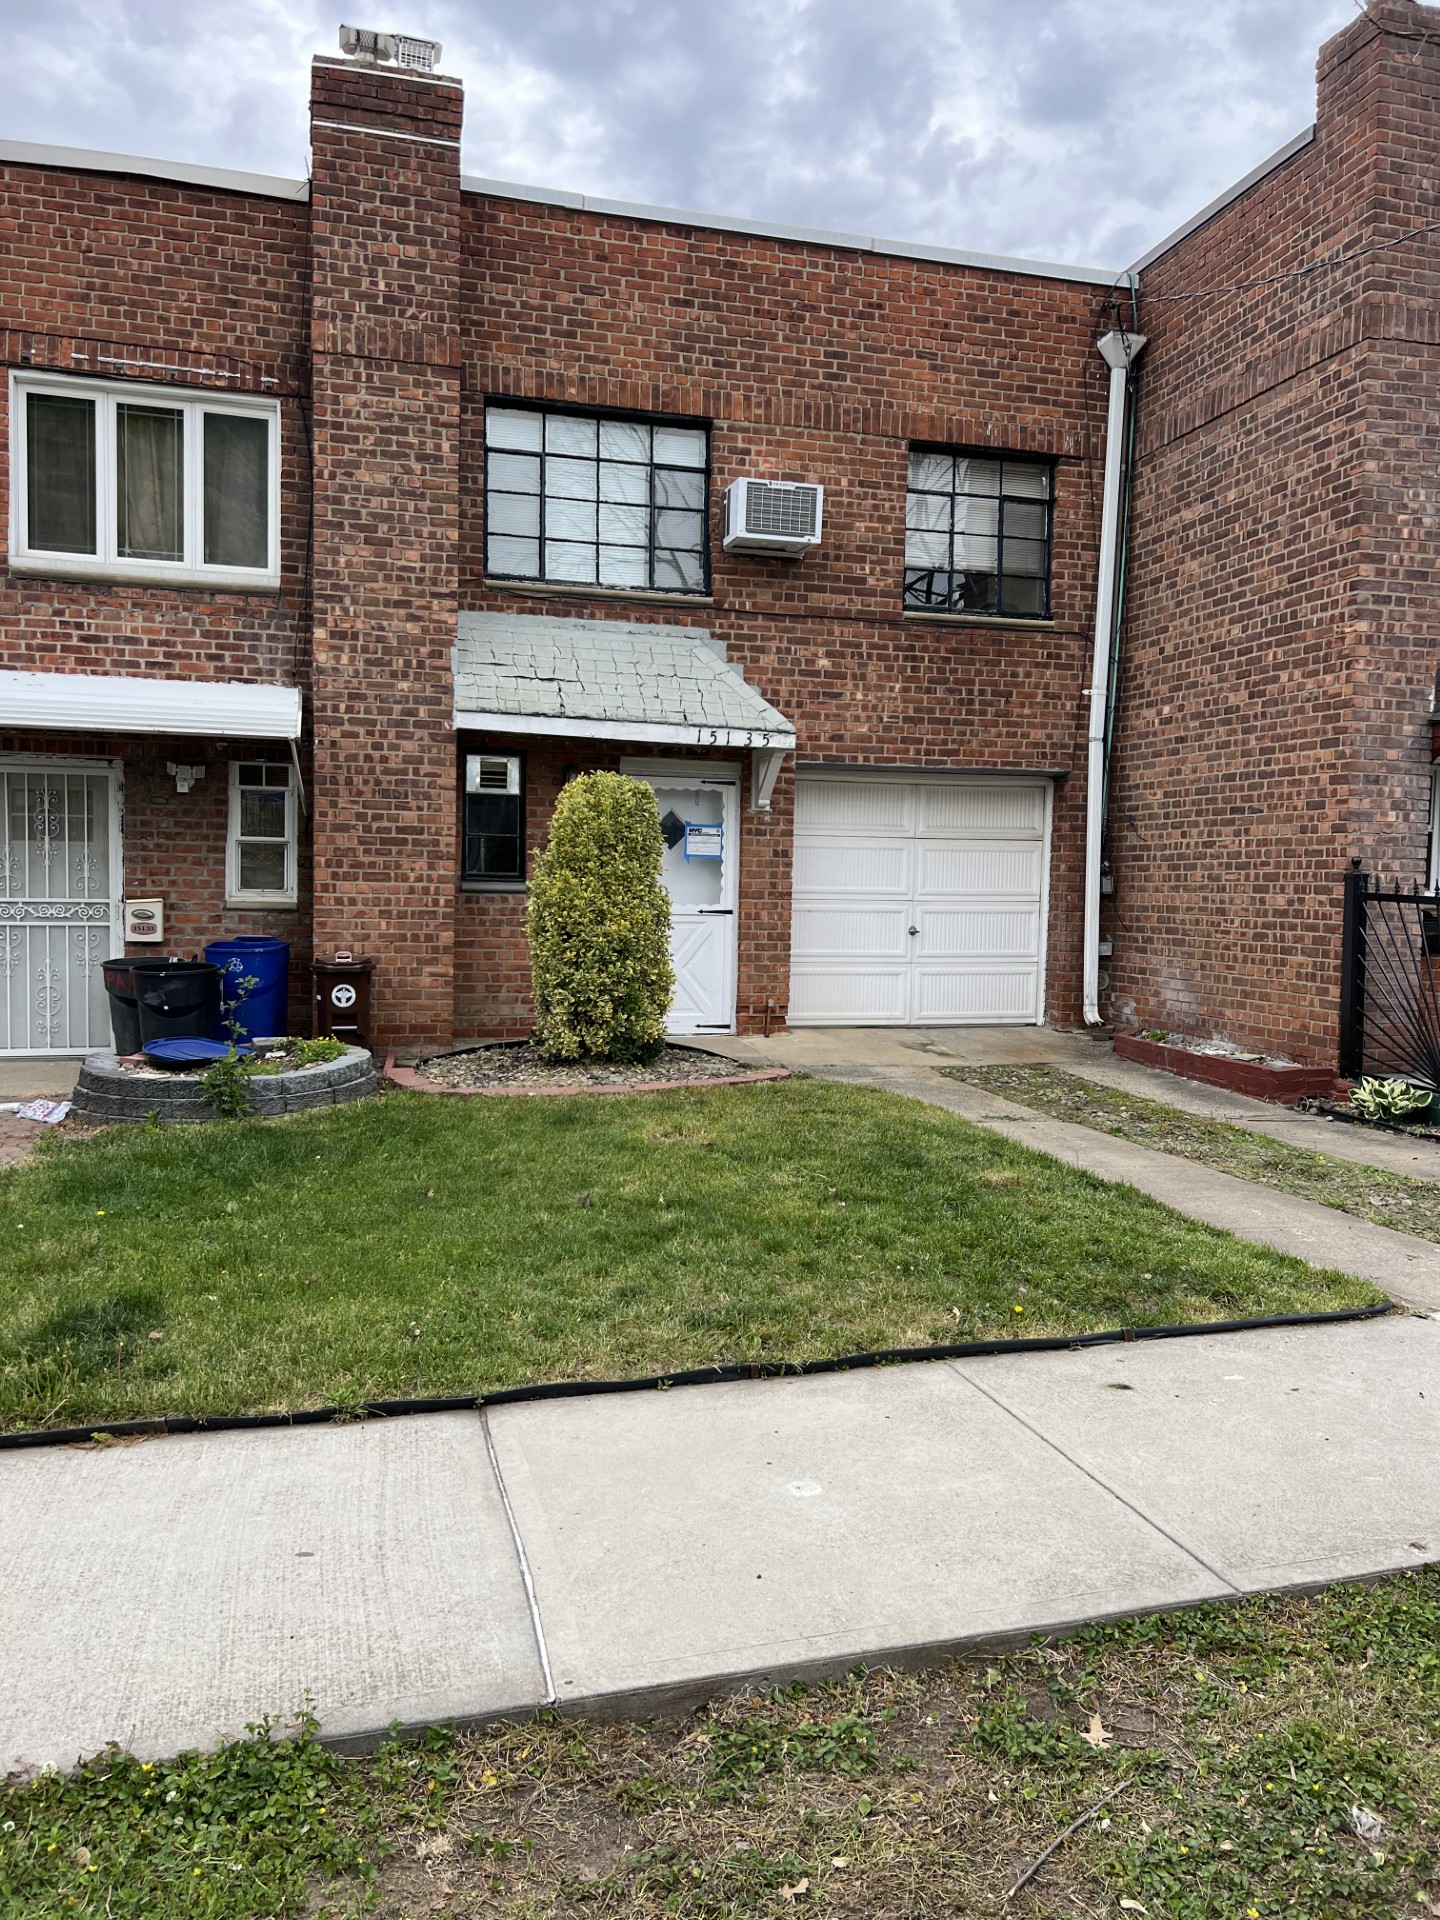 Beautiful 1 Bedroom Apartment in Whitestone. Features Living Room, Eat in Kitchen, 1 Bedroom, 1 Full Bathroom, Access to Yard. Hardwood Floors, New Paint, New Bathroom. Close to Shops and Transportation